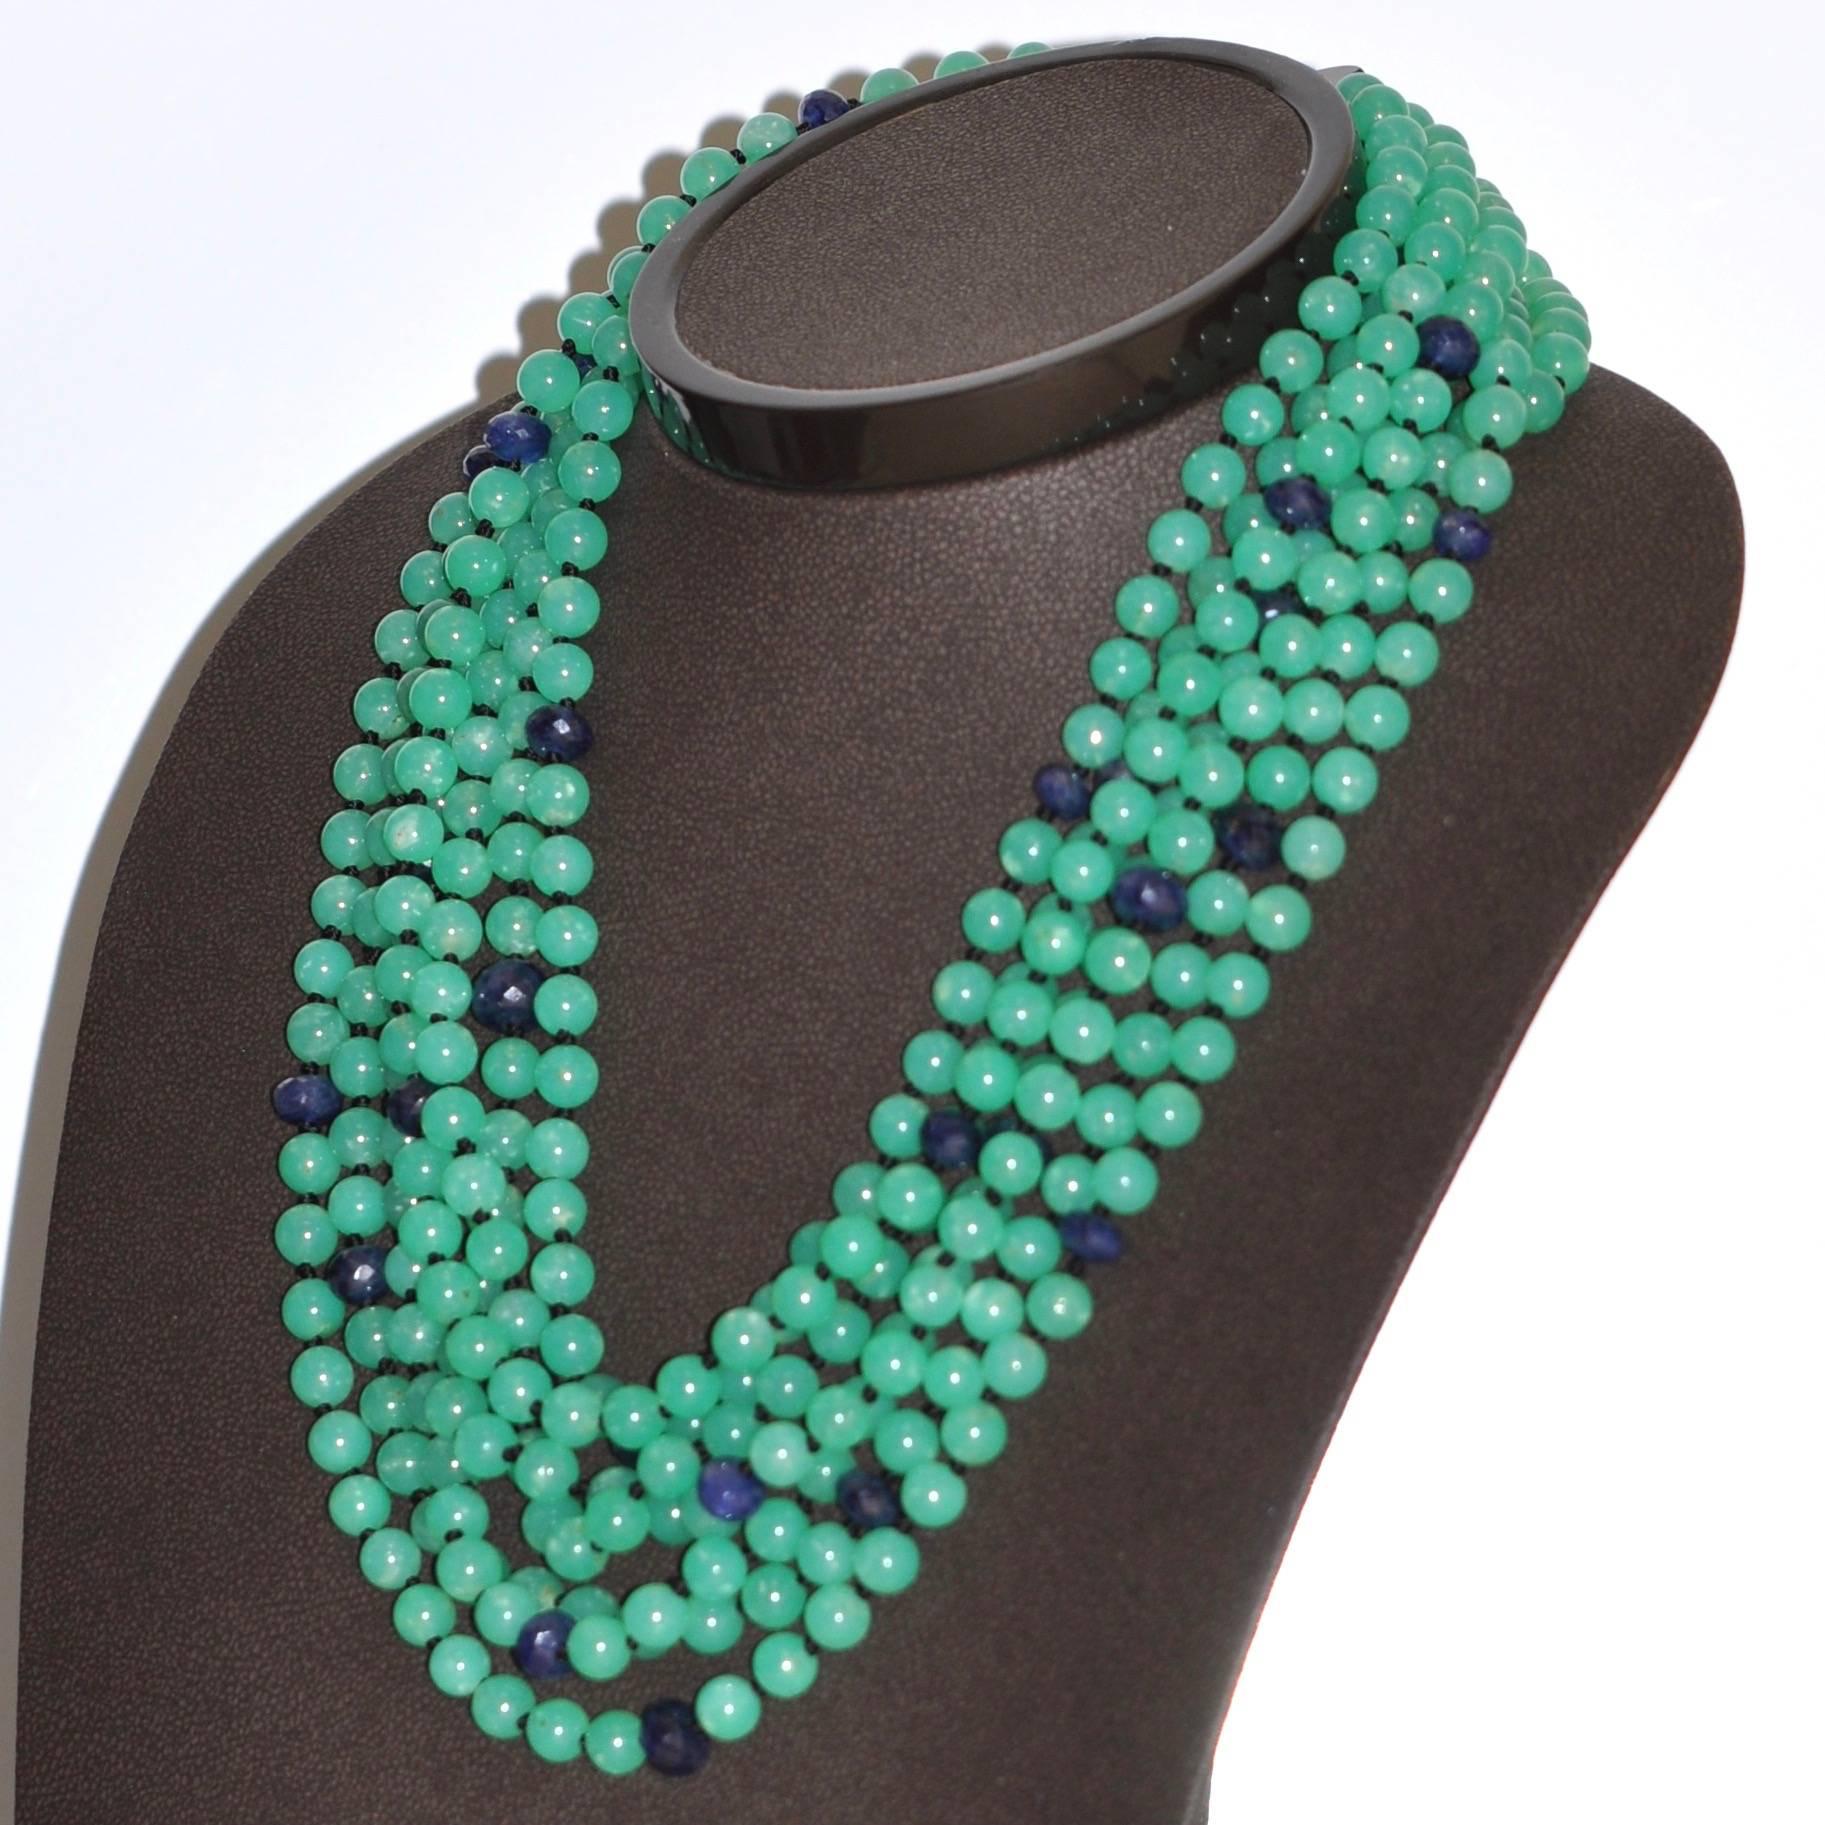 Discover this Natural Sapphires and Chrysophrases Multi-Strand Necklace.
Chrysophrases
Blue Sapphires
Bakelite Clasp